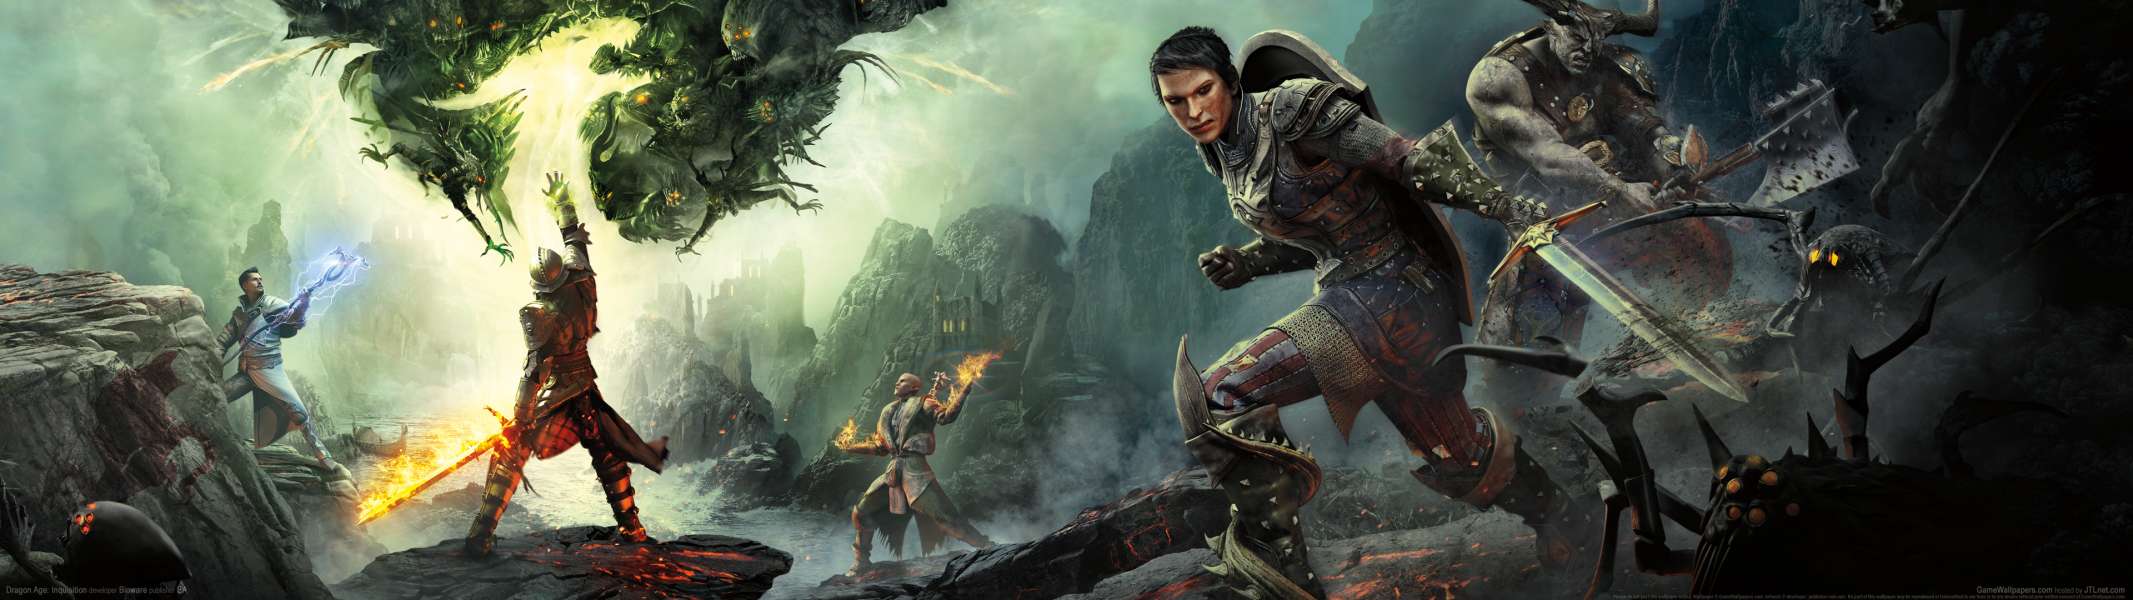 Dragon Age: Inquisition dual screen achtergrond